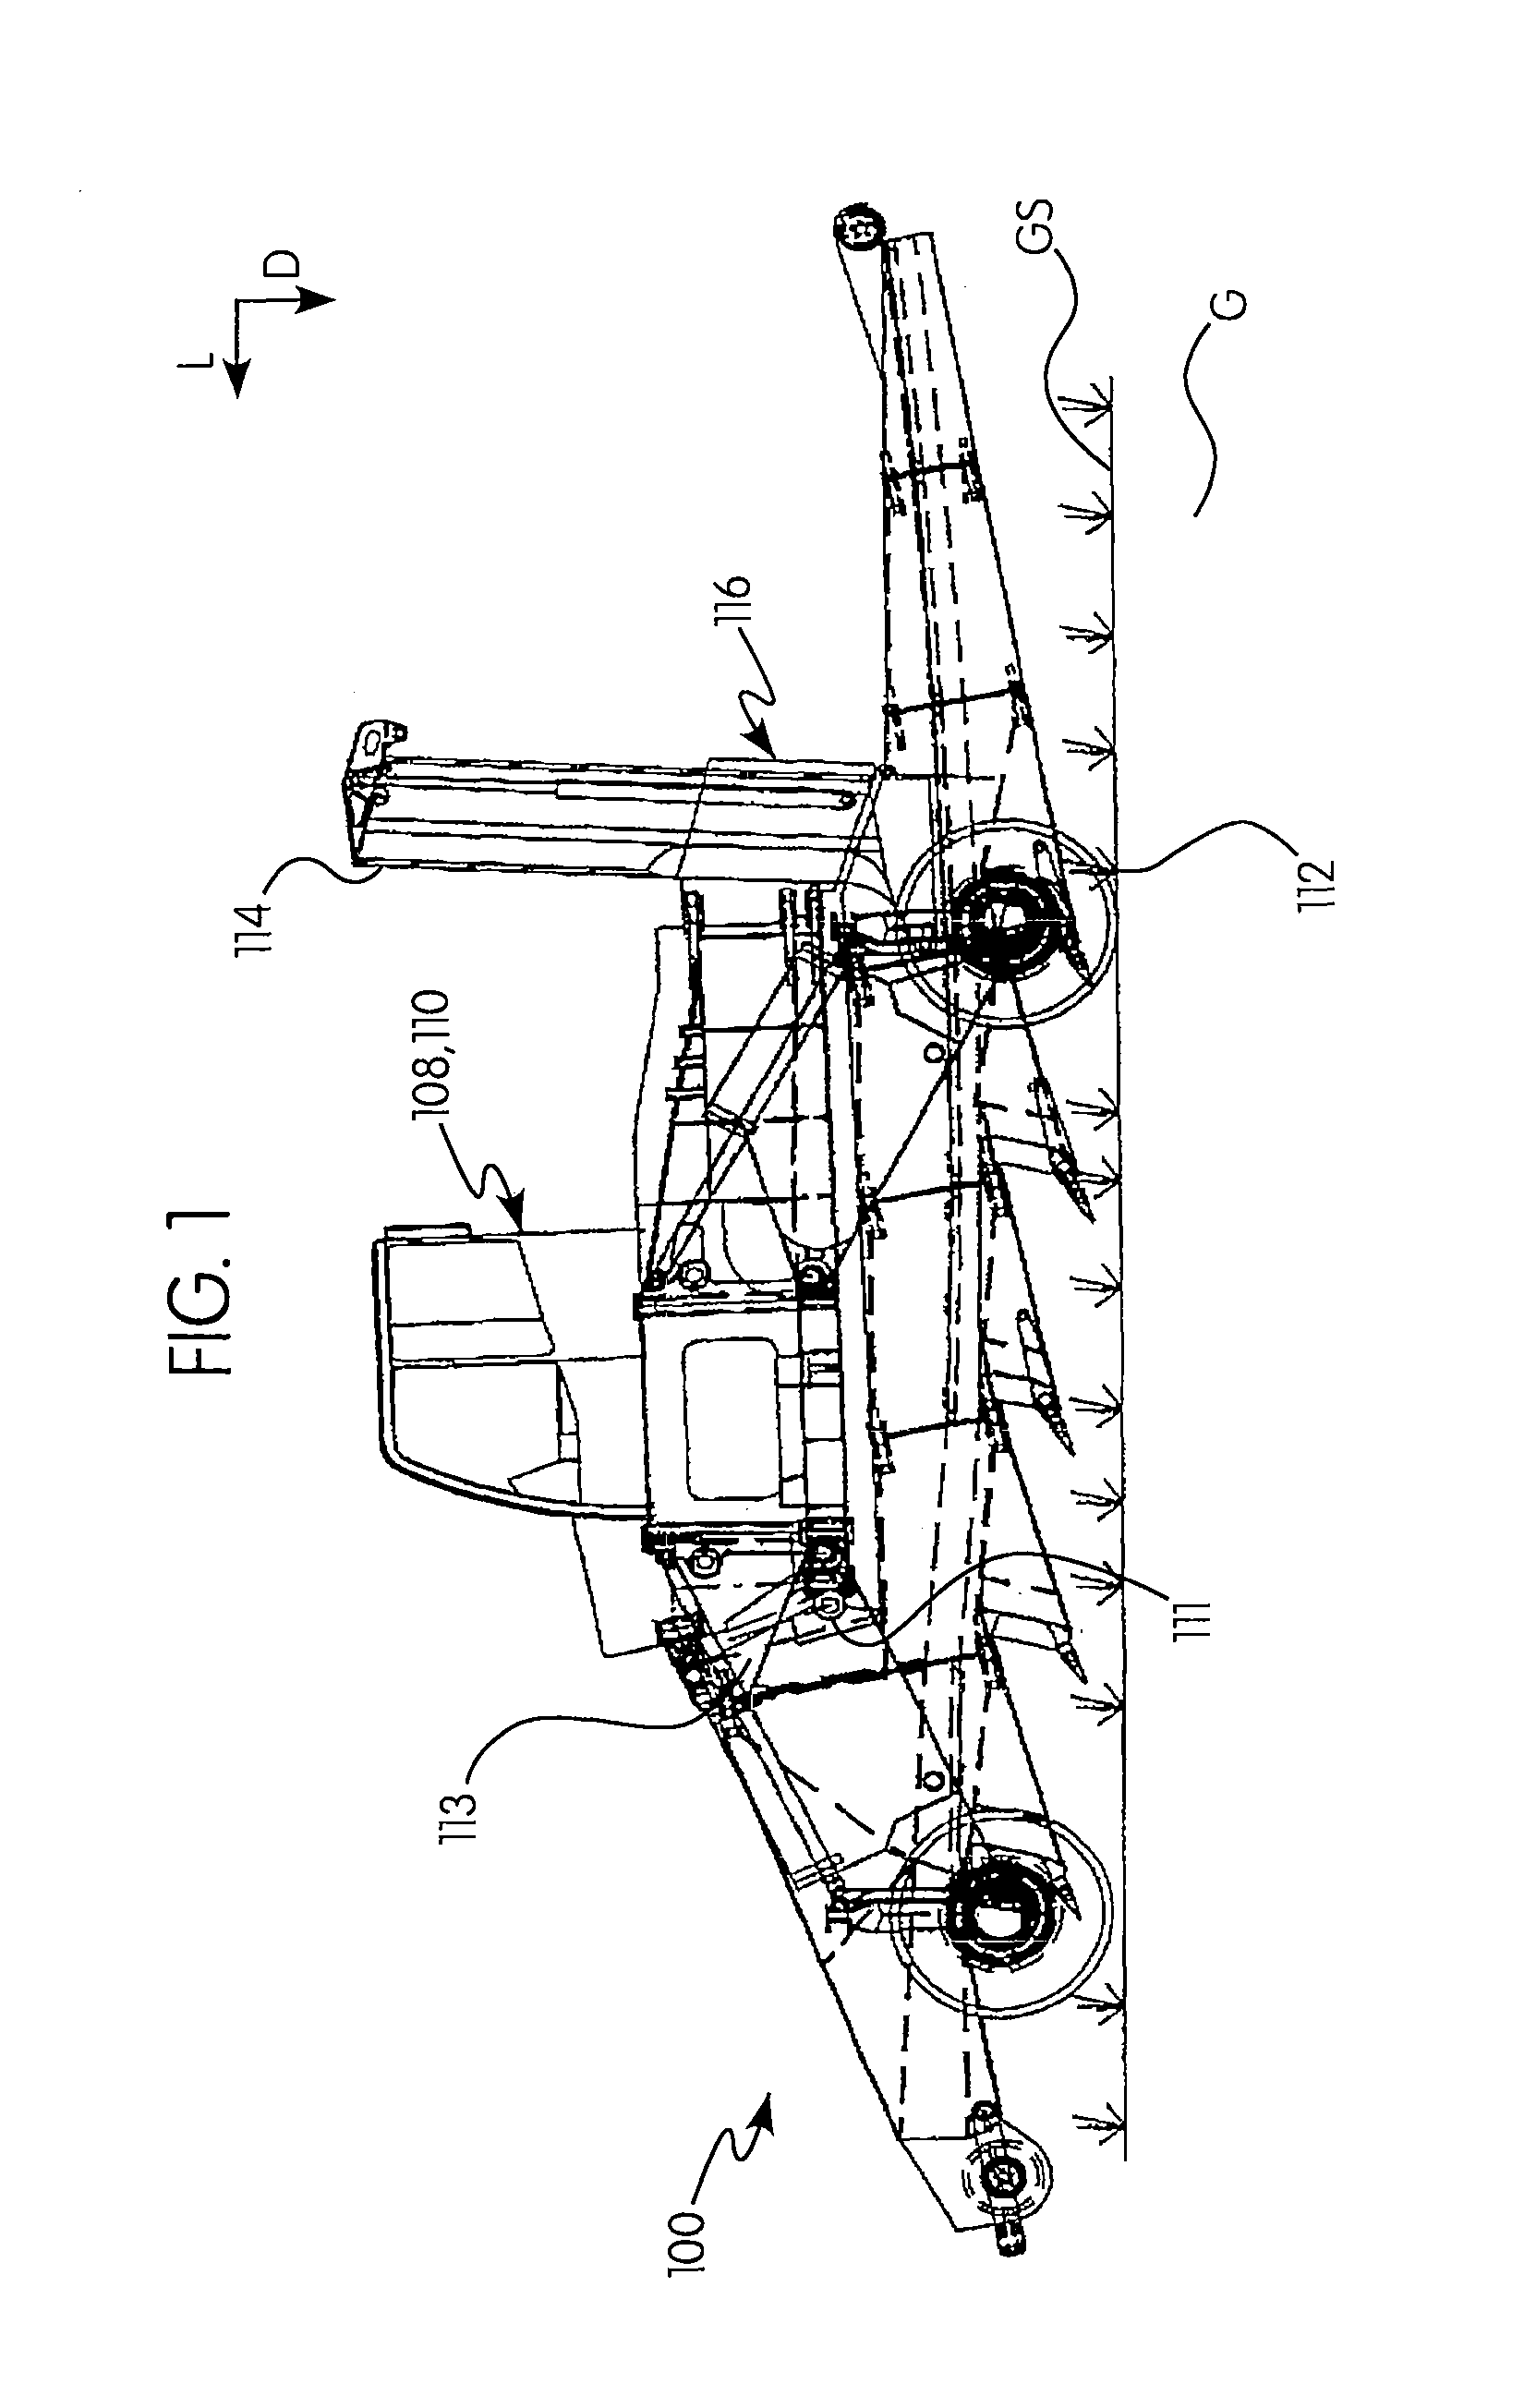 Strand-like material laying device for cutting the ground and inserting strand-like material into the ground